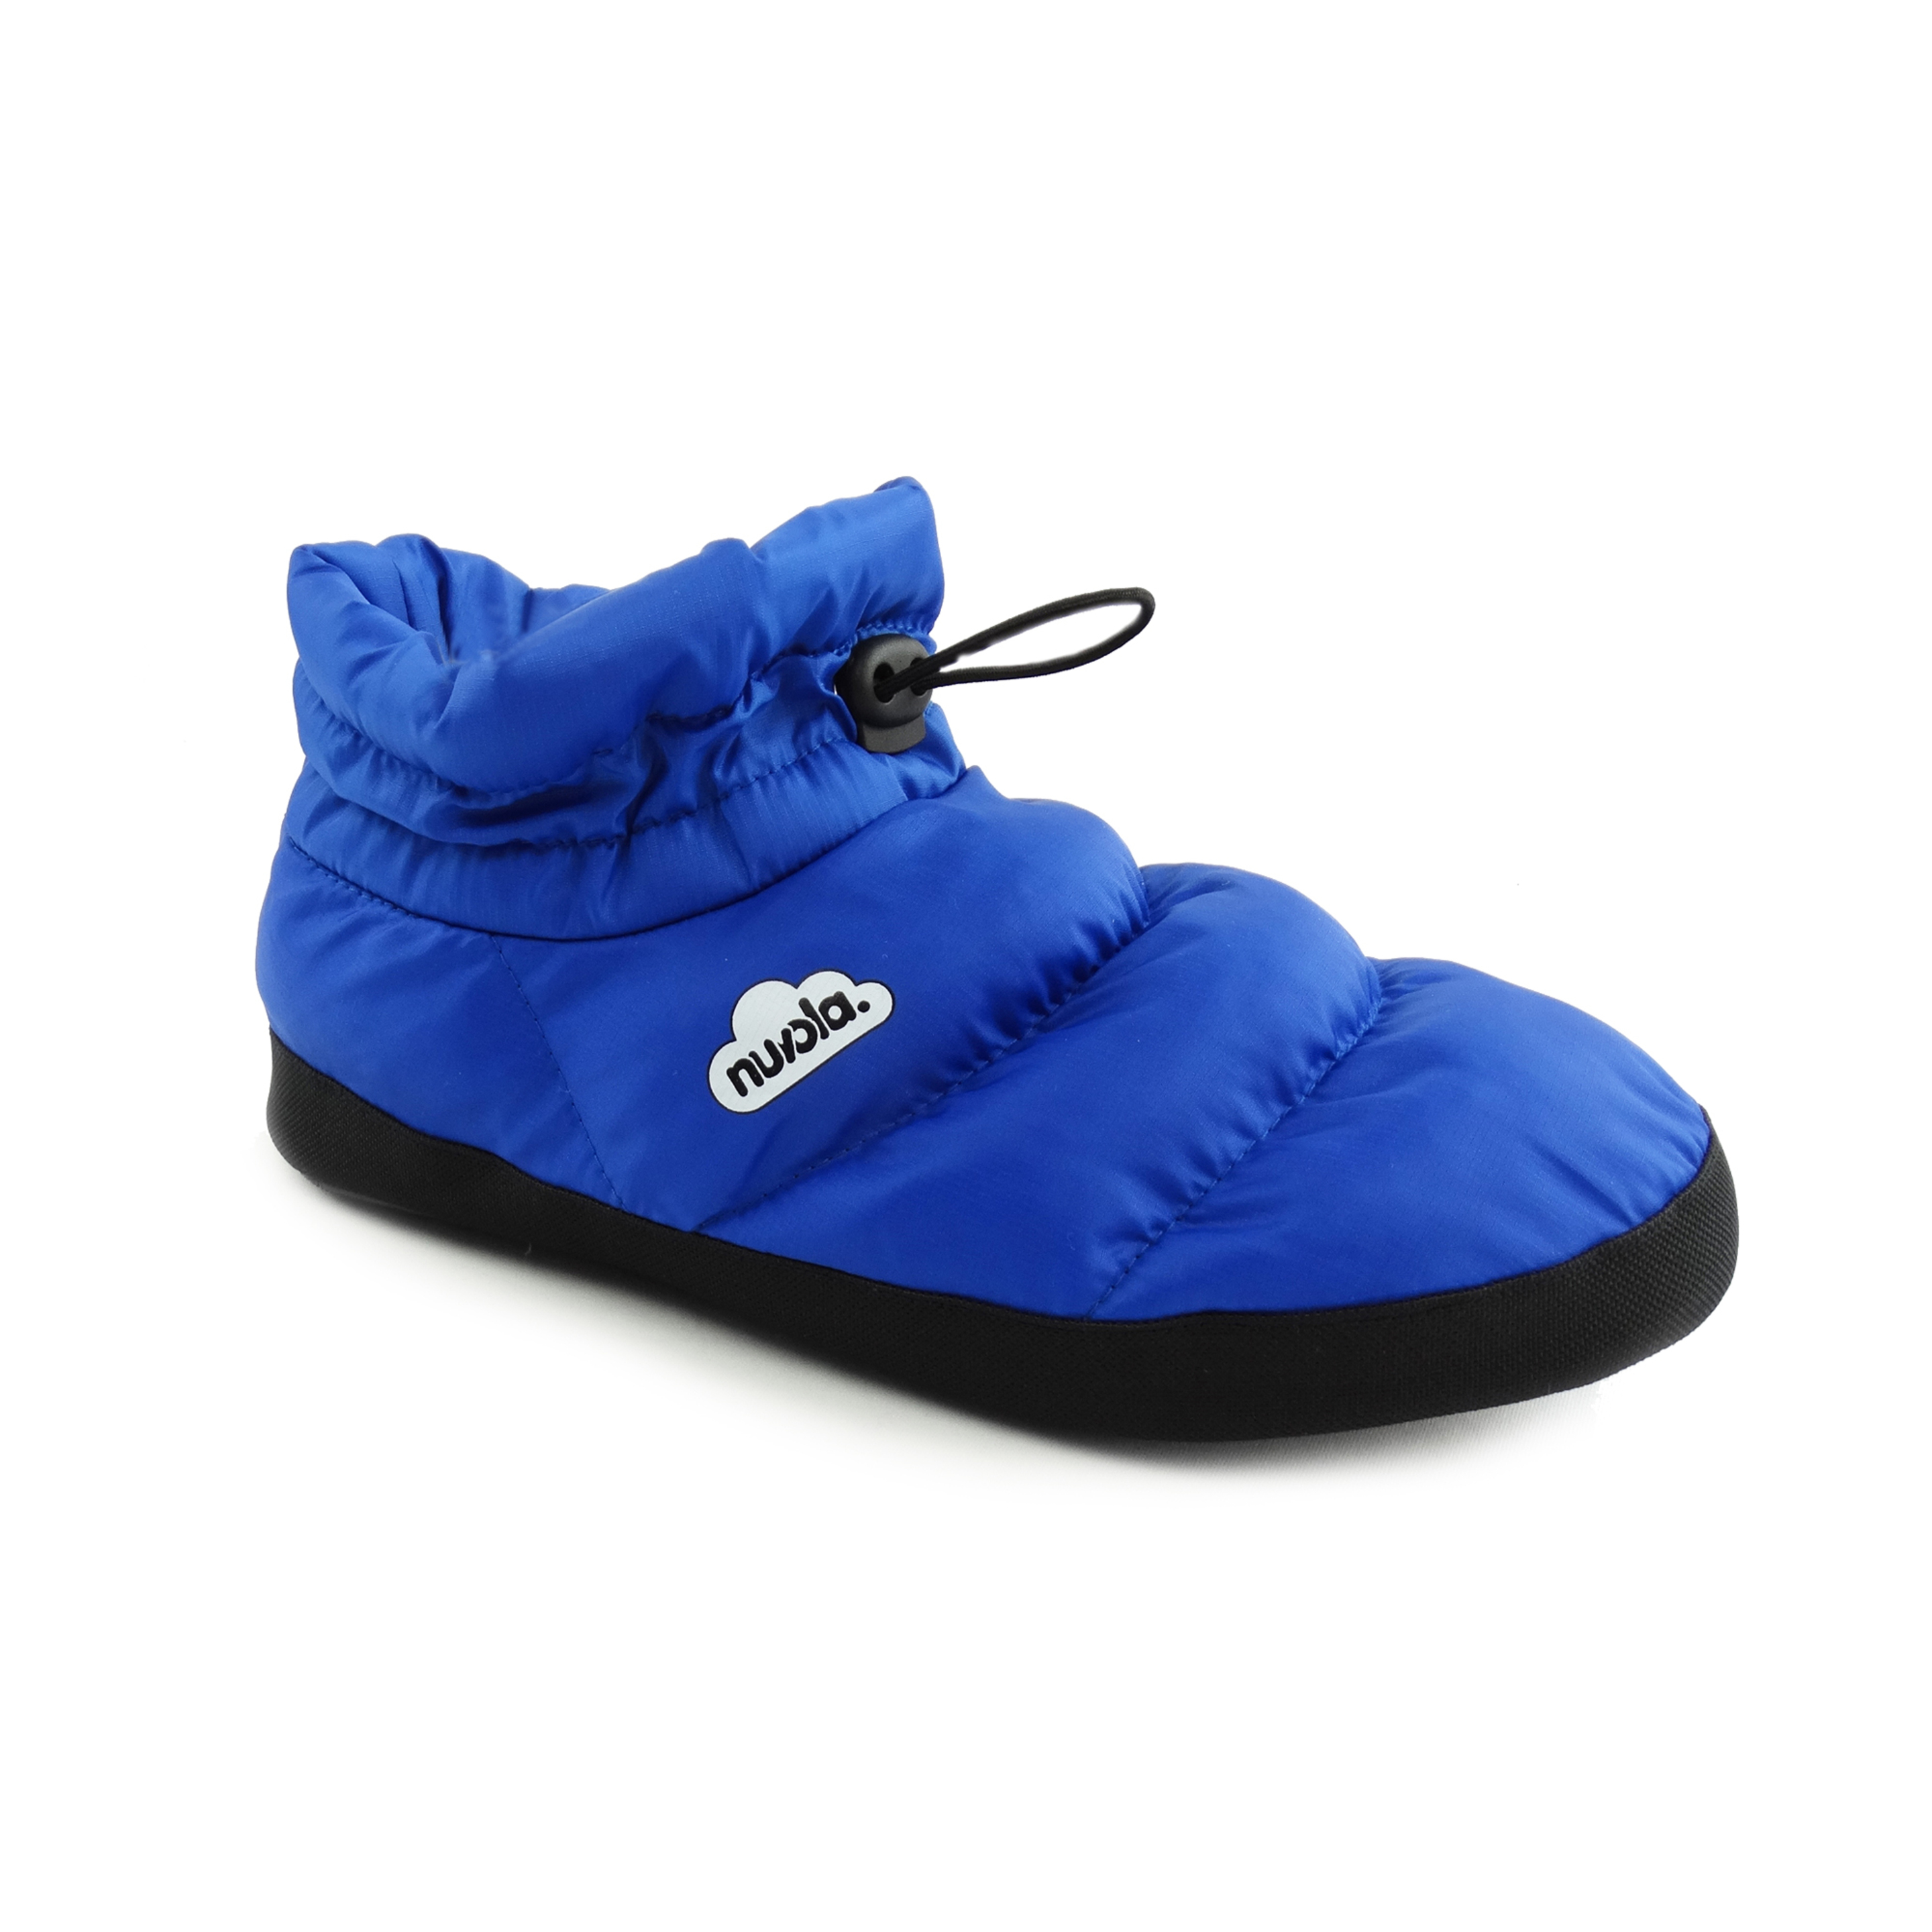 Slippers Camping Nuvola®,boot Home Suela De Goma